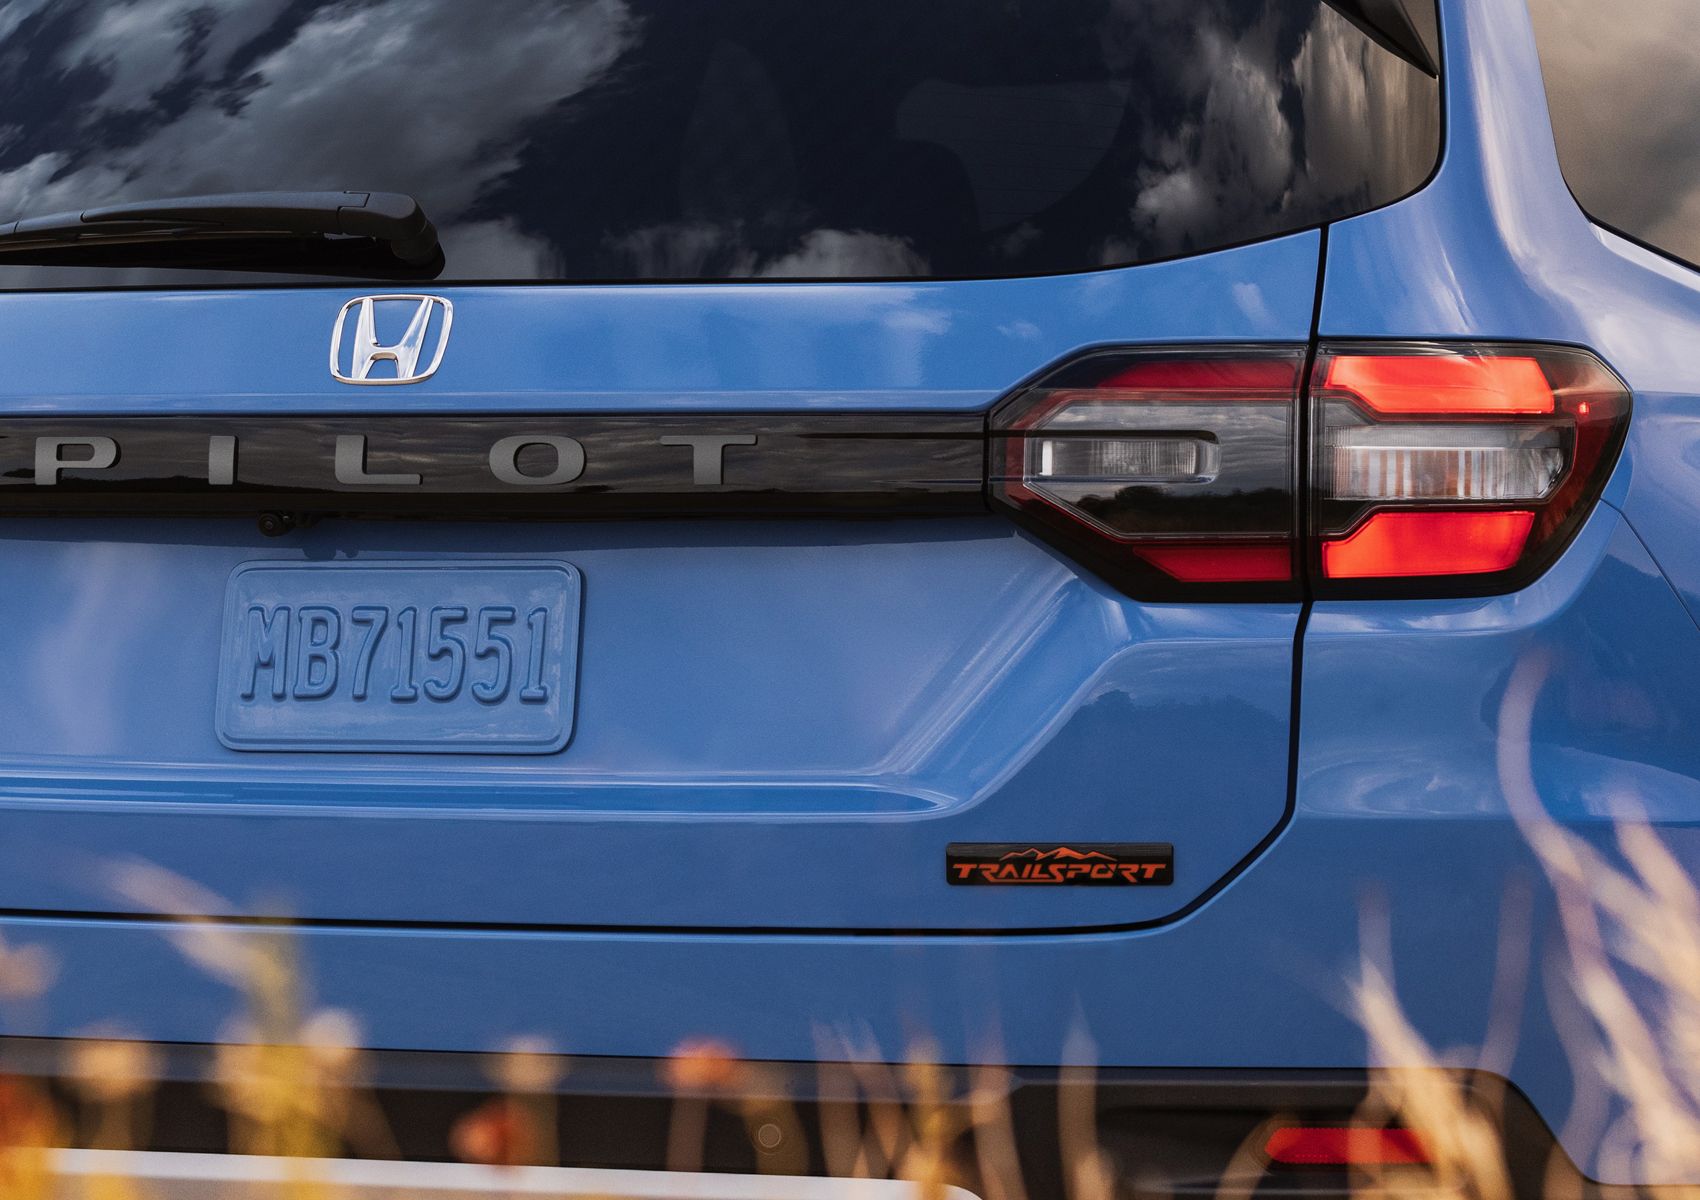 The 2023 Honda Pilot Will Pack Some Serious Muscle And Armor For An SUV